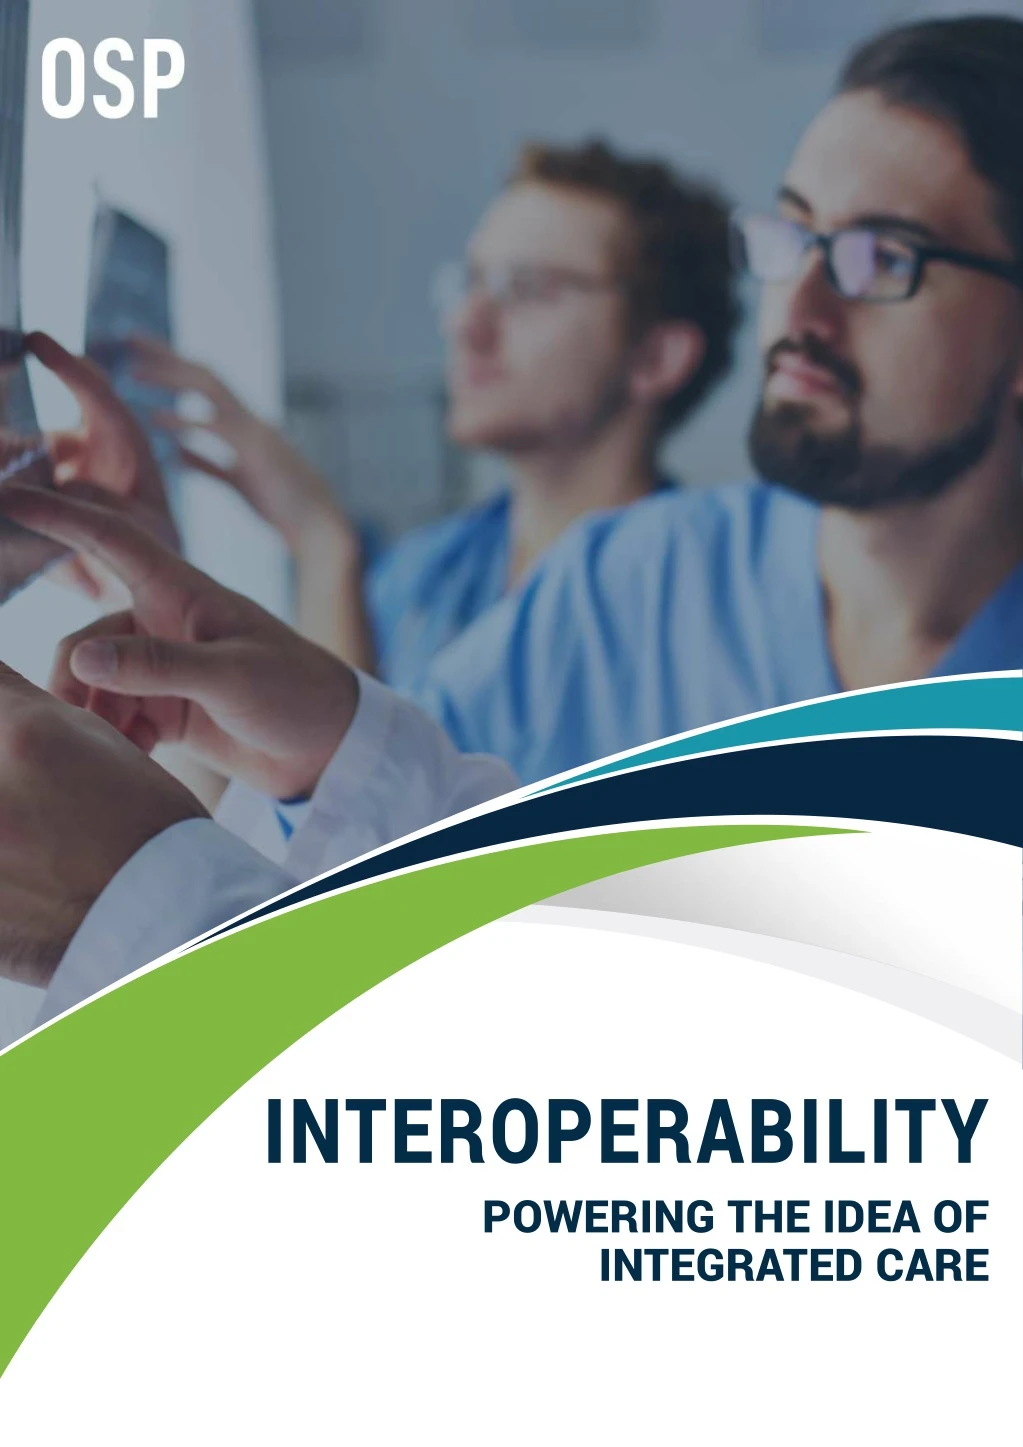 interoperability powering the idea of integrated